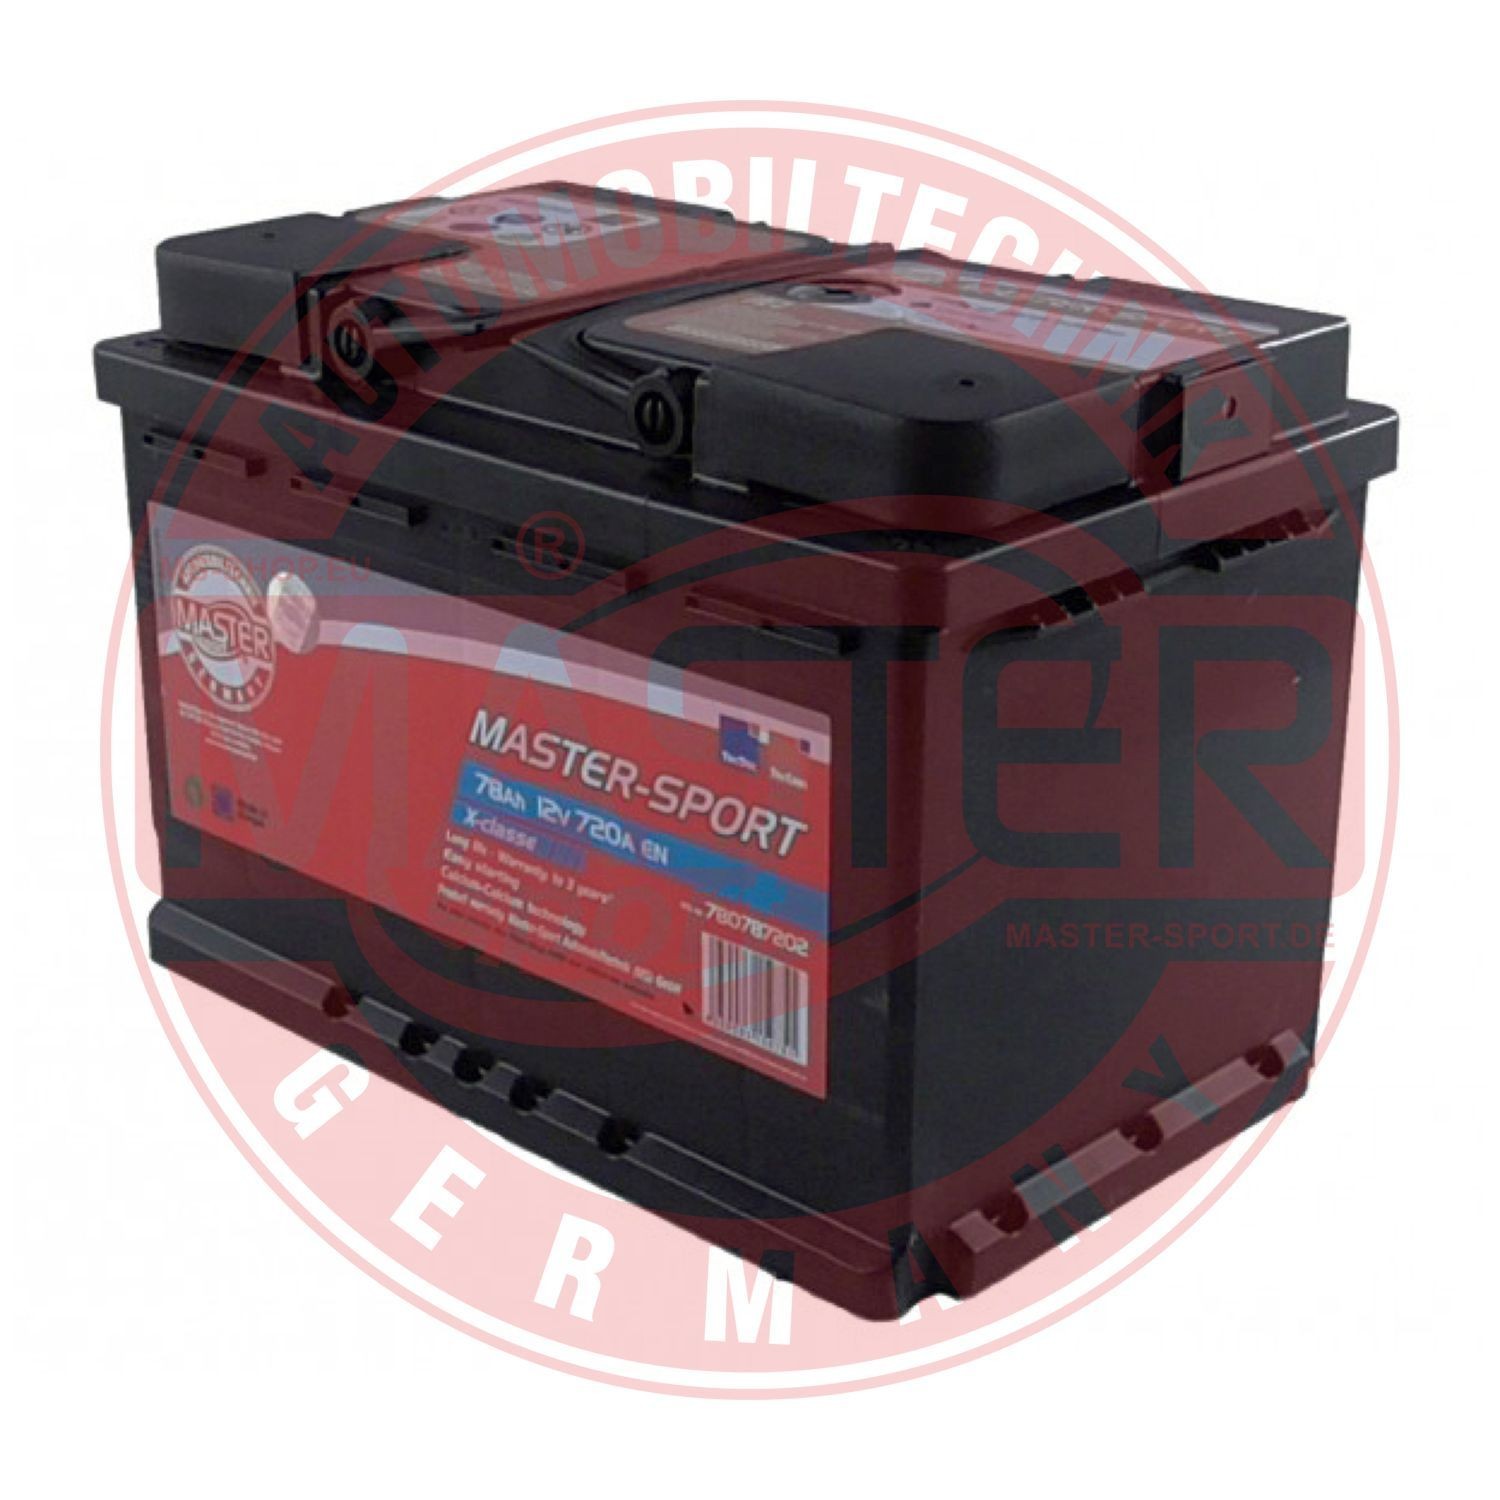 MASTER-SPORT 780787202 Battery VCY1-510655-AA